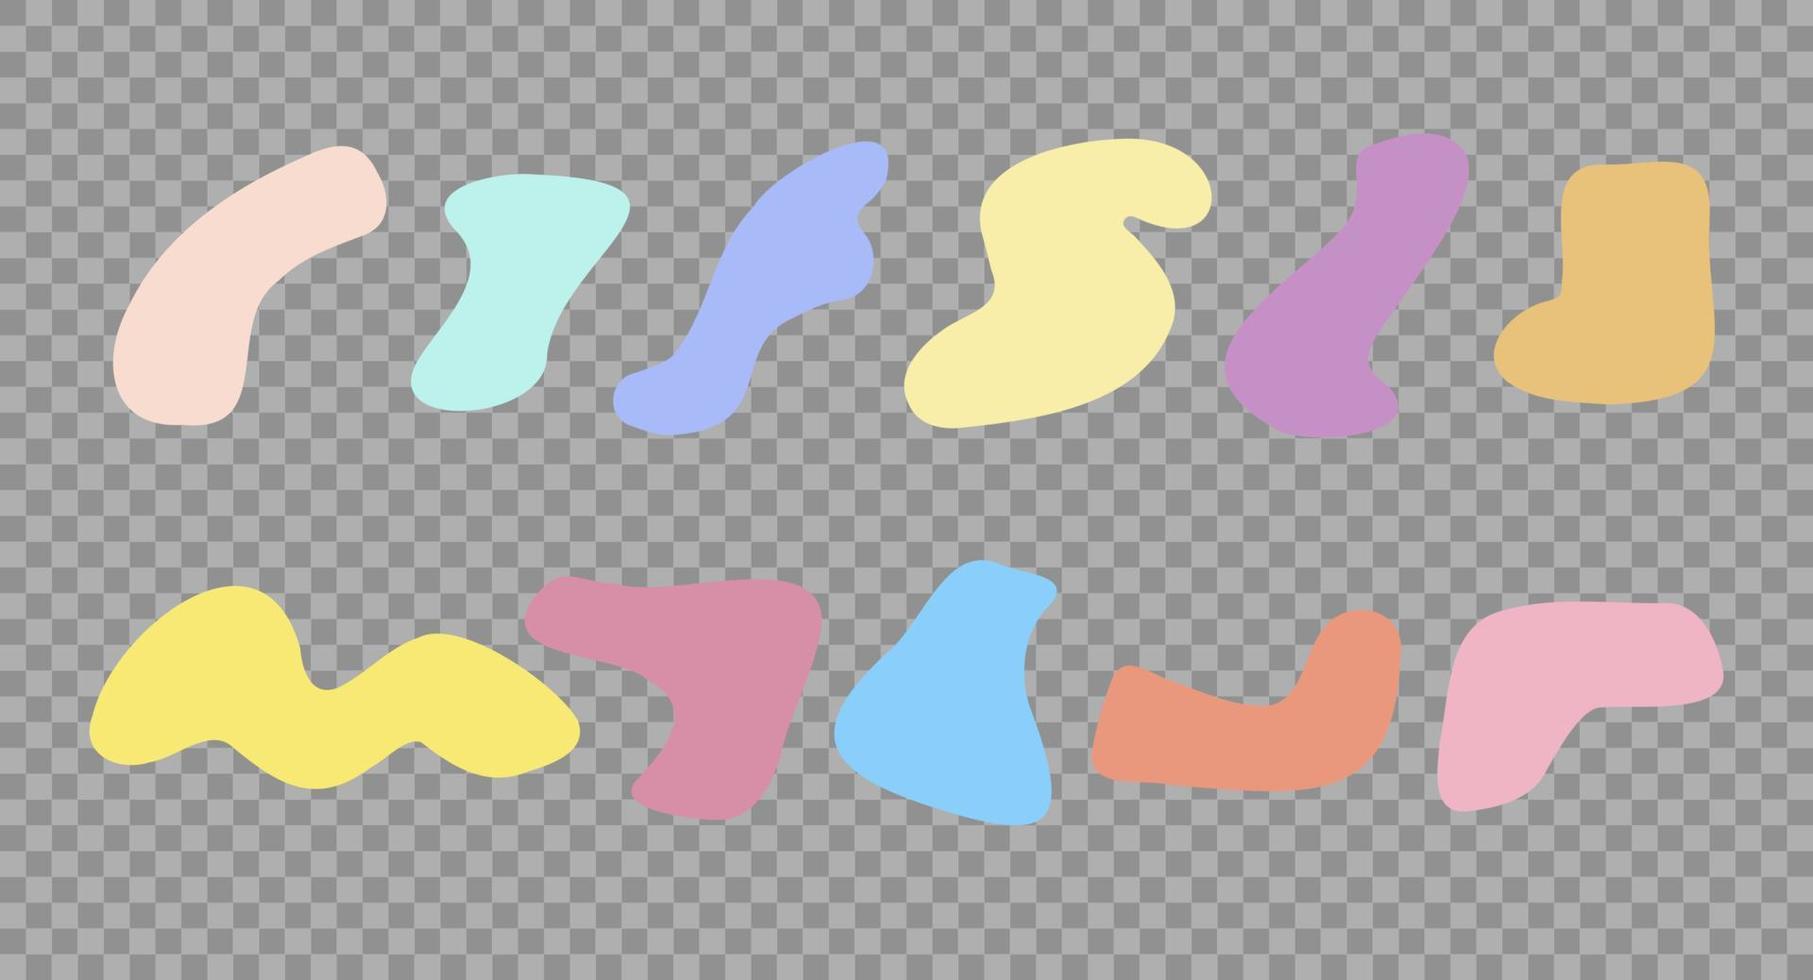 Random color shapes set on a transparent background. Pastel colors. Silhouettes of spots. Vector hand-drawn illustration